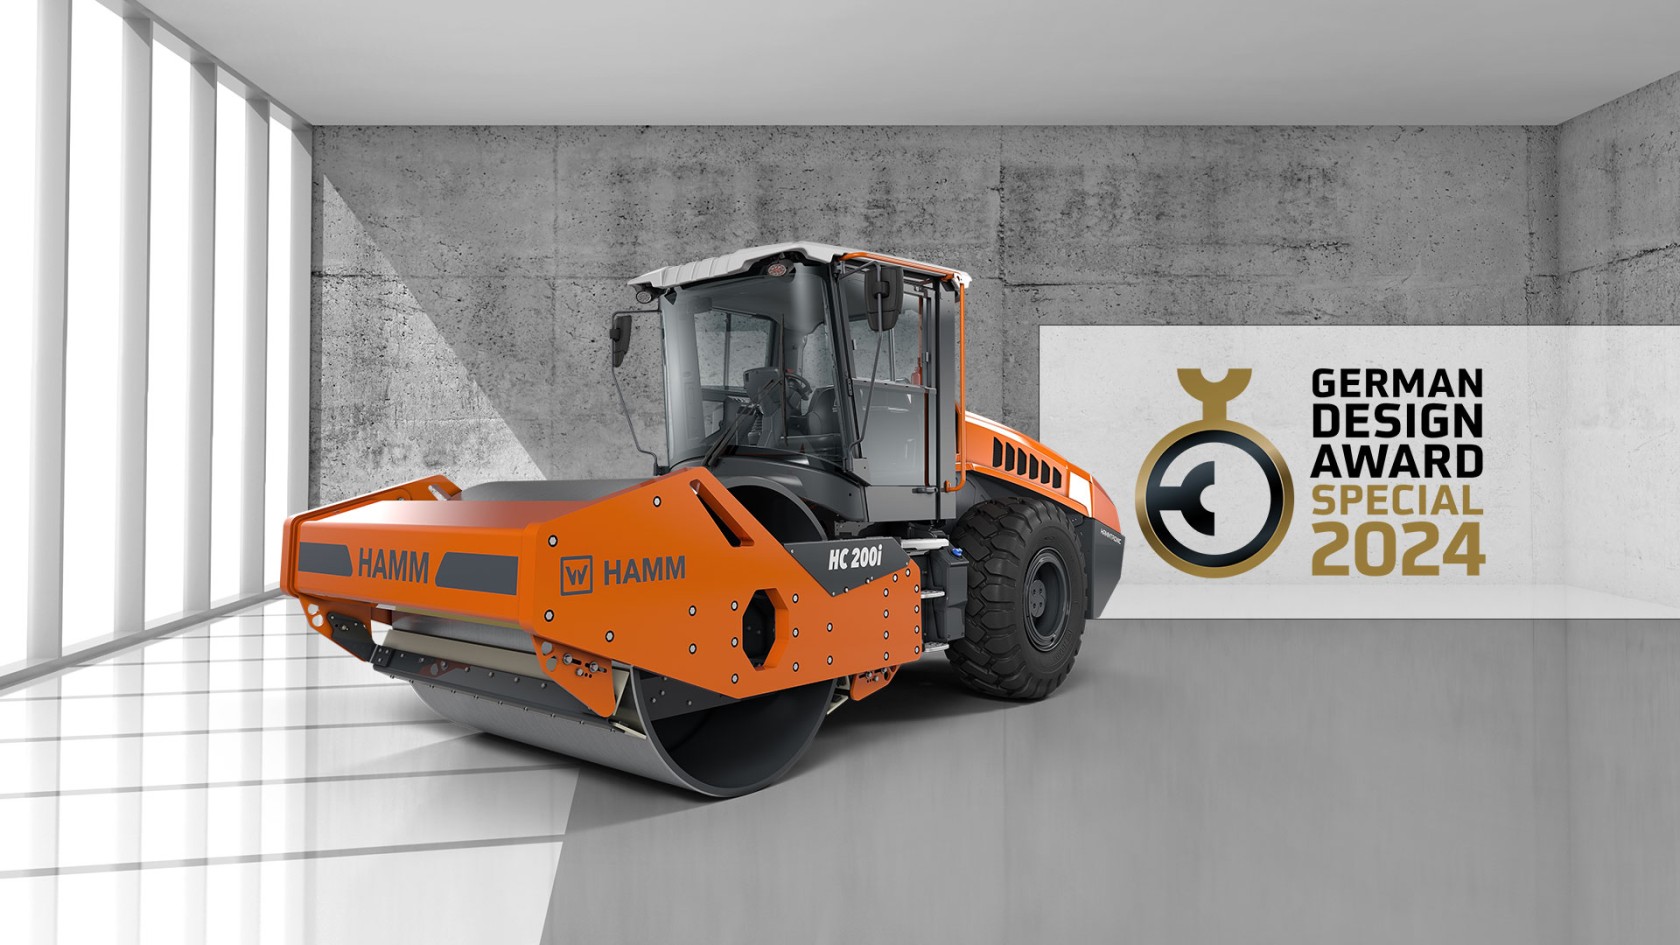 HC 200i roller in space with concrete background, right German Design Award Special 2024 logo